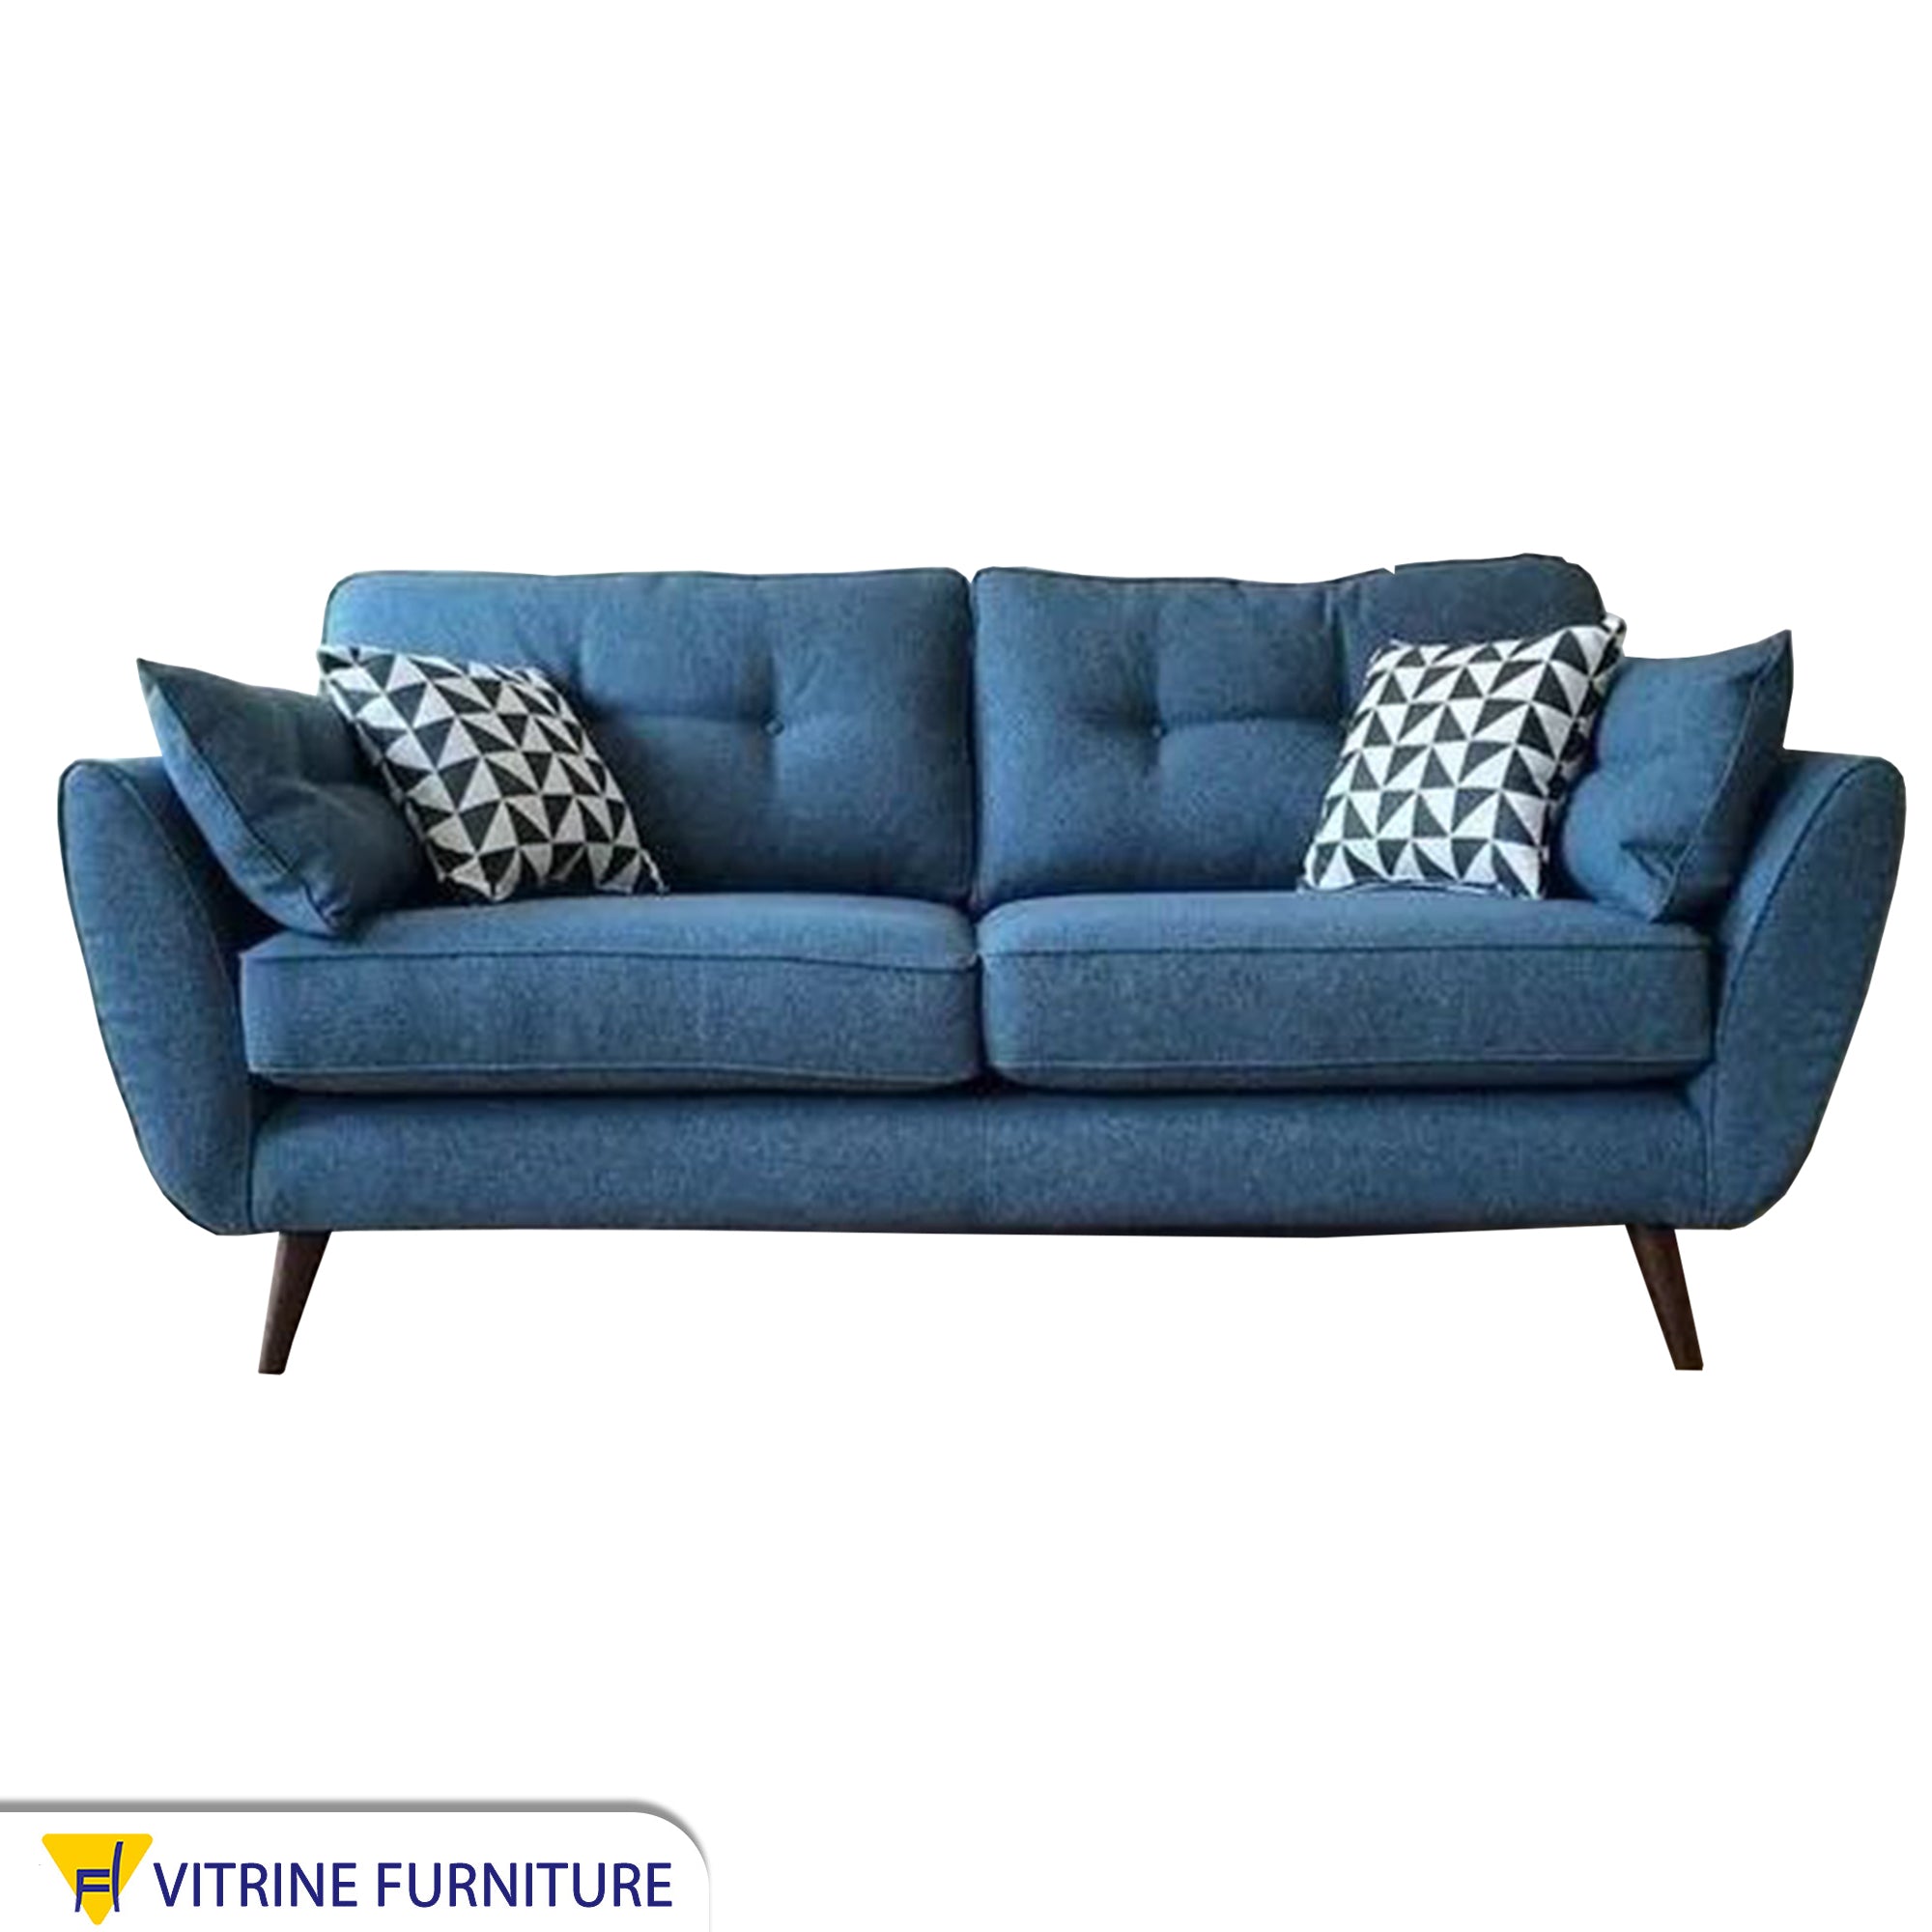 Navy sofa with curved armrests